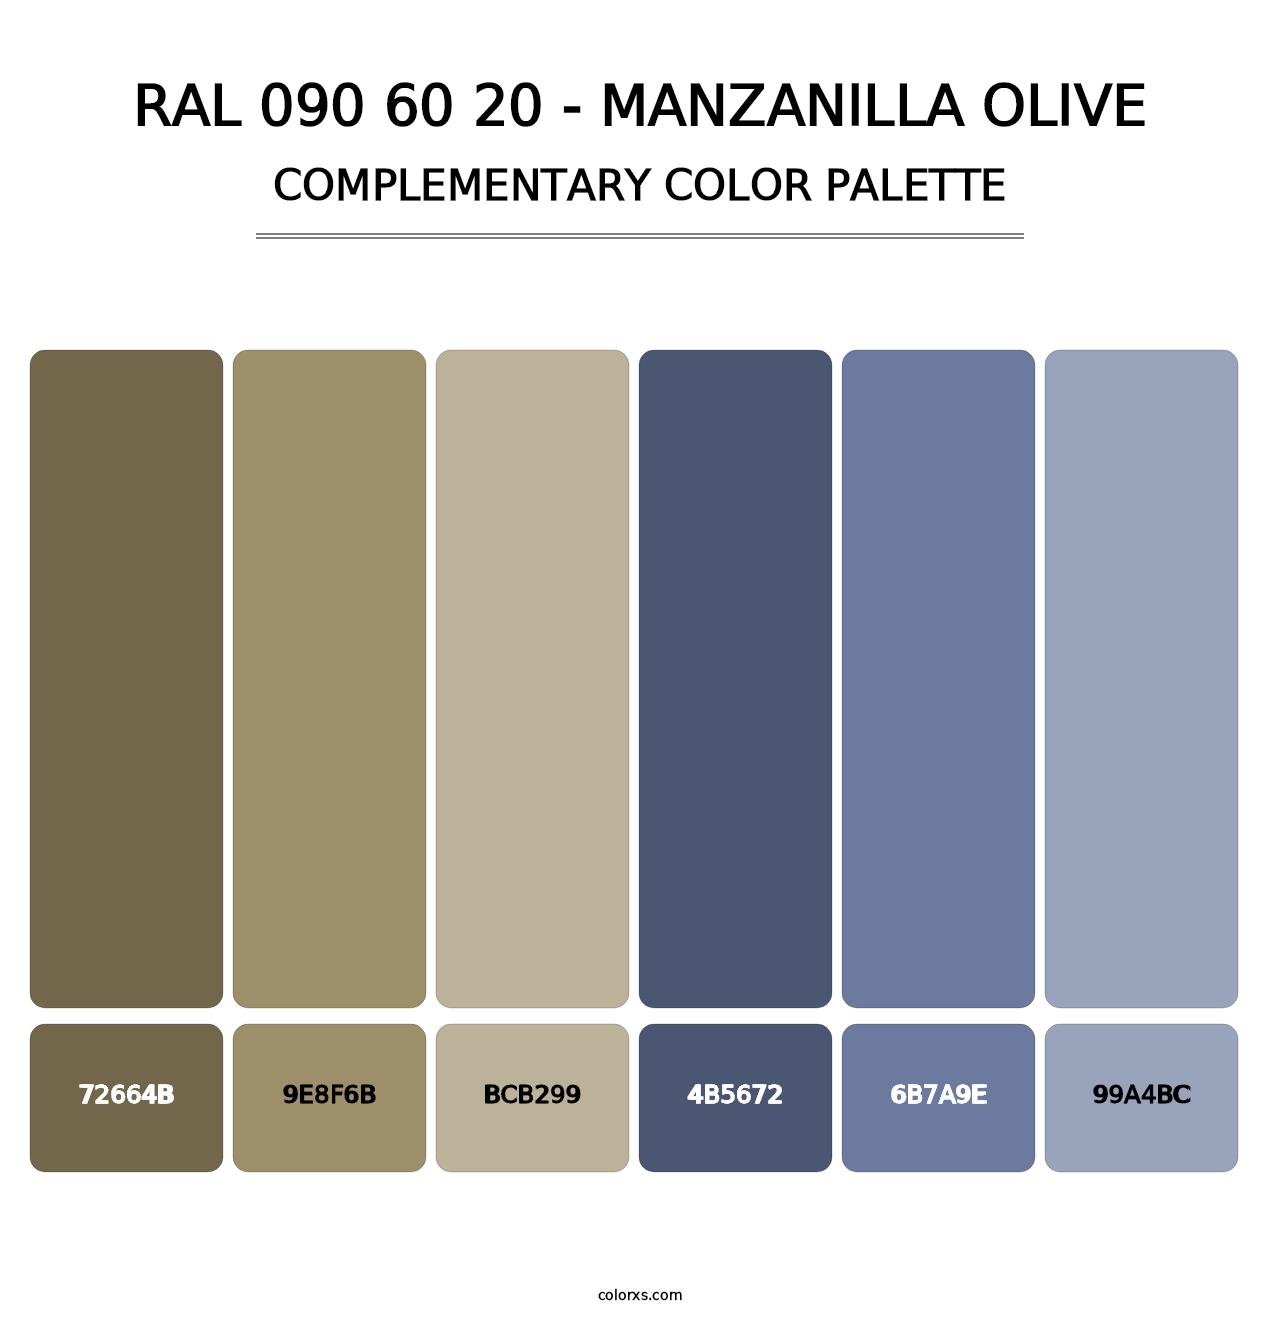 RAL 090 60 20 - Manzanilla Olive - Complementary Color Palette